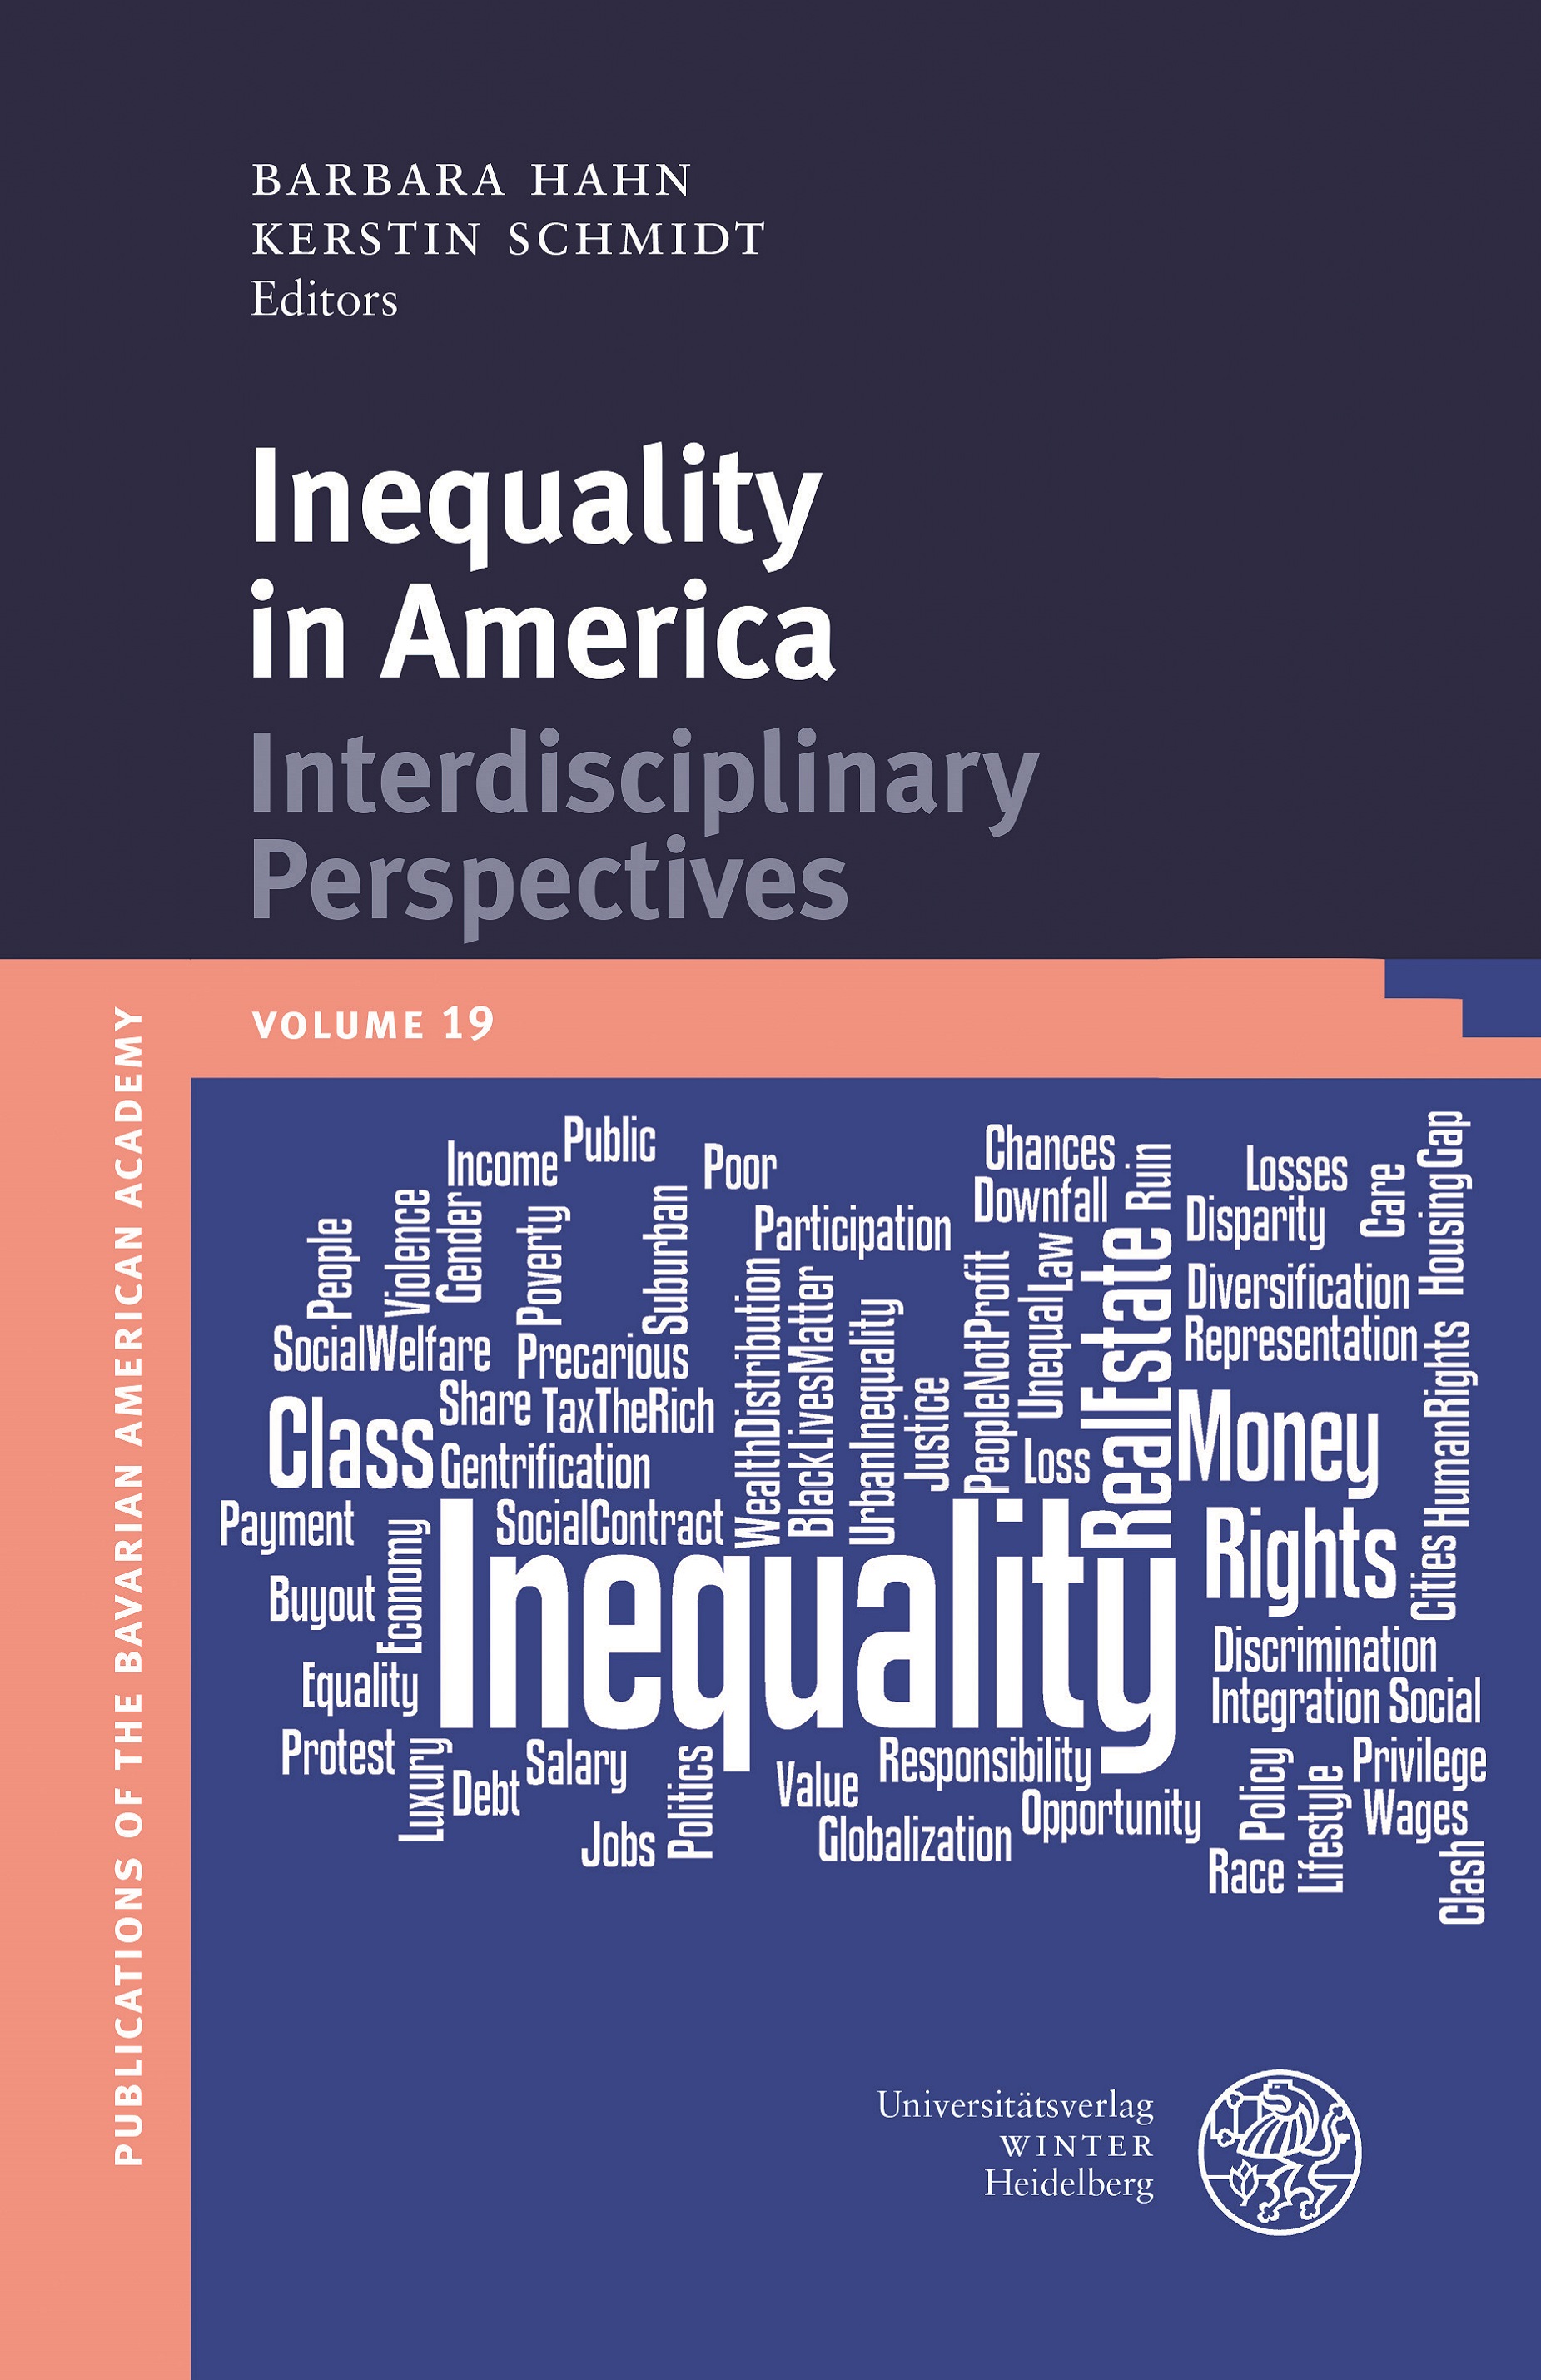 BAA-Publikation Vol. 19 Inequality in America: Interdisciplinary Perspectives